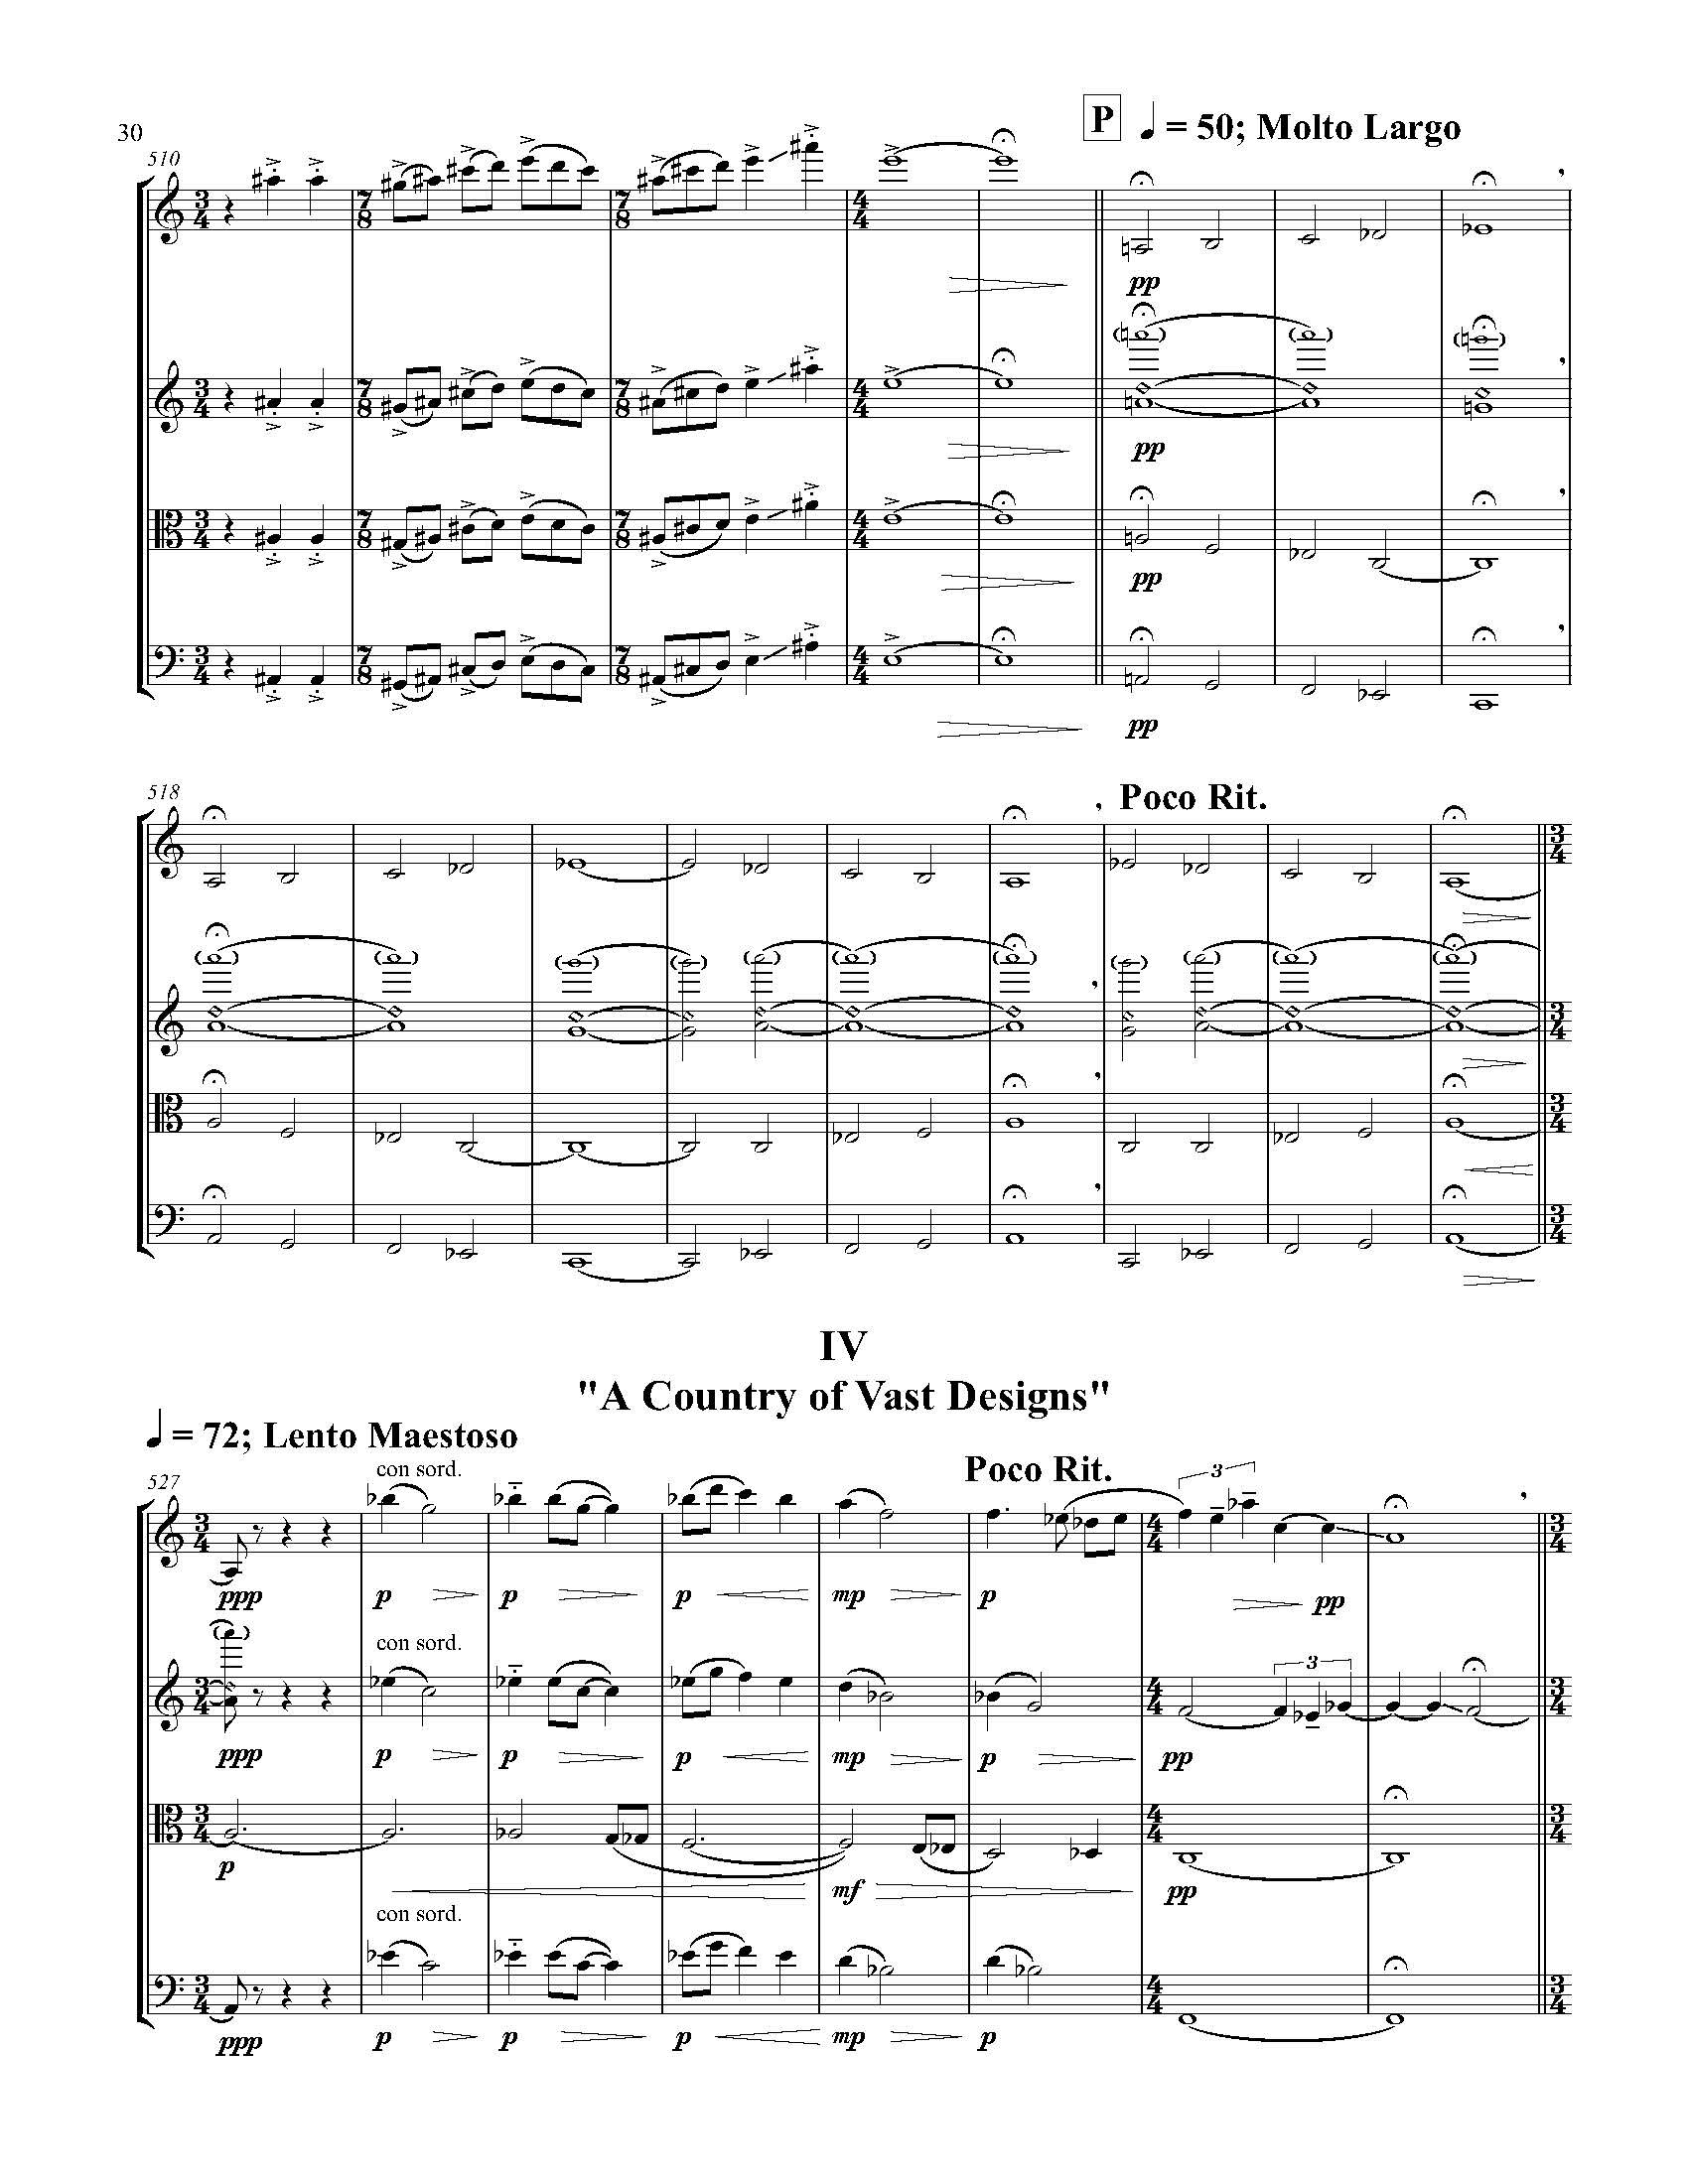 A Country of Vast Designs - Complete Score_Page_36.jpg